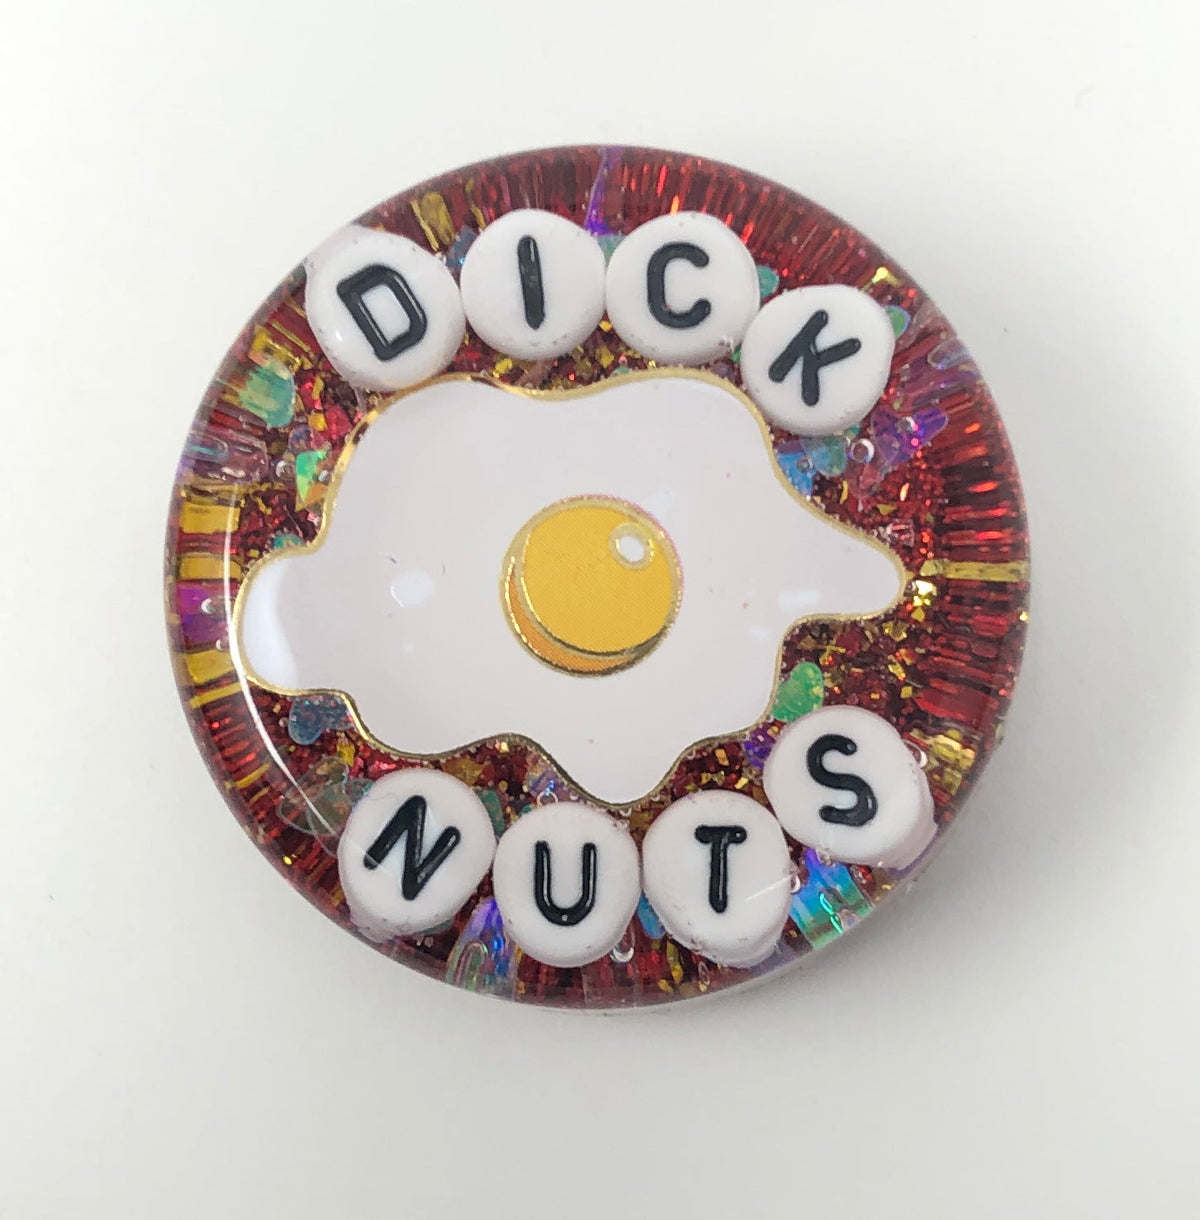 Dick Nuts - Shower Art - READY TO SHIP